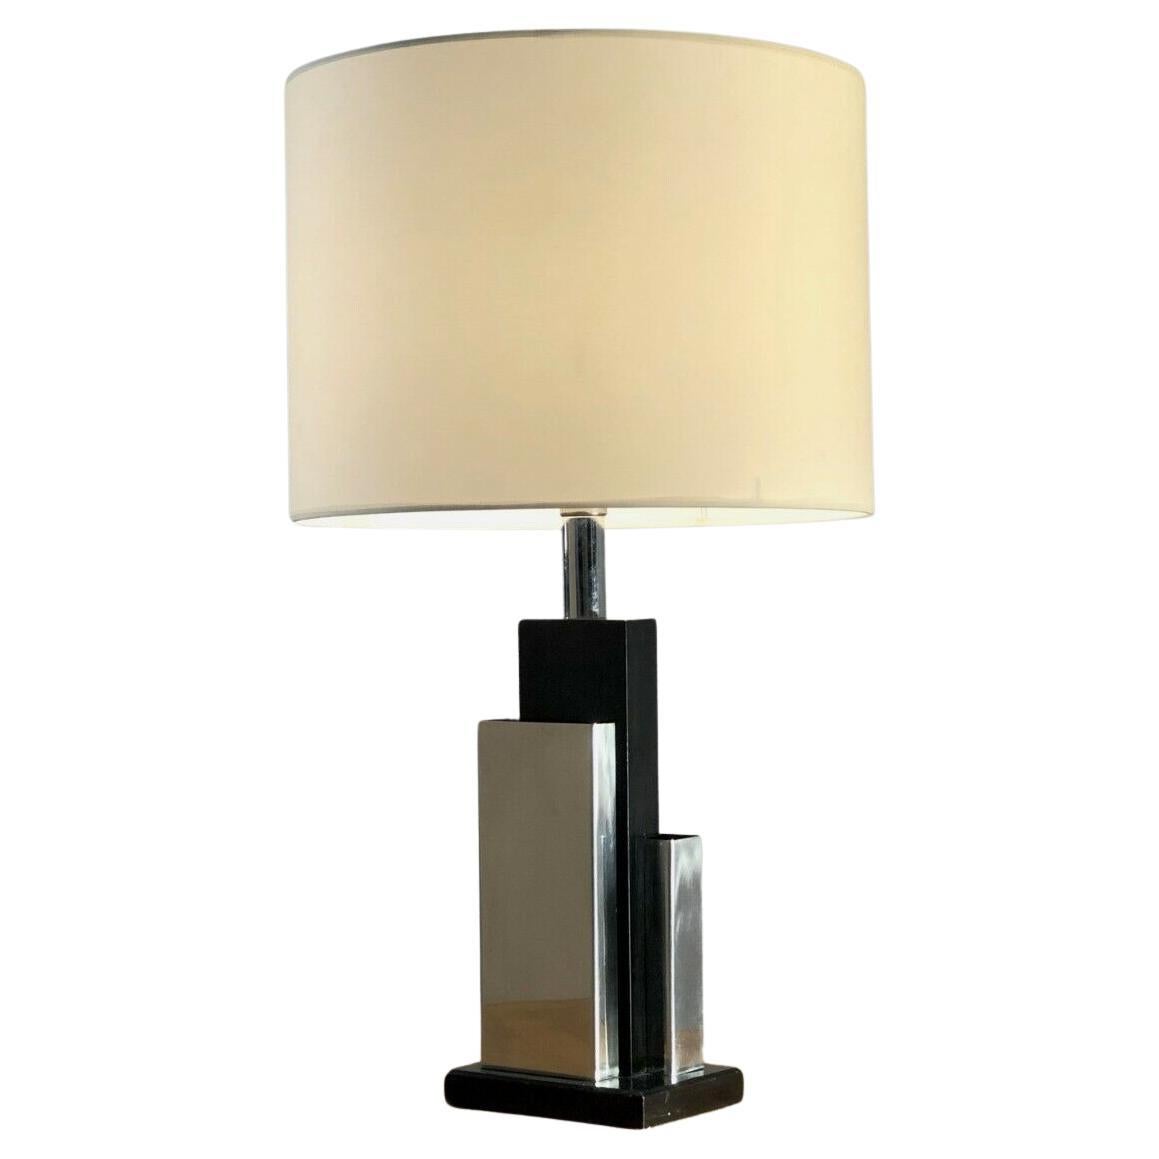 A RADICAL POST-MODERN TABLE LAMP, in the style of WILLY RIZZO, France 1970